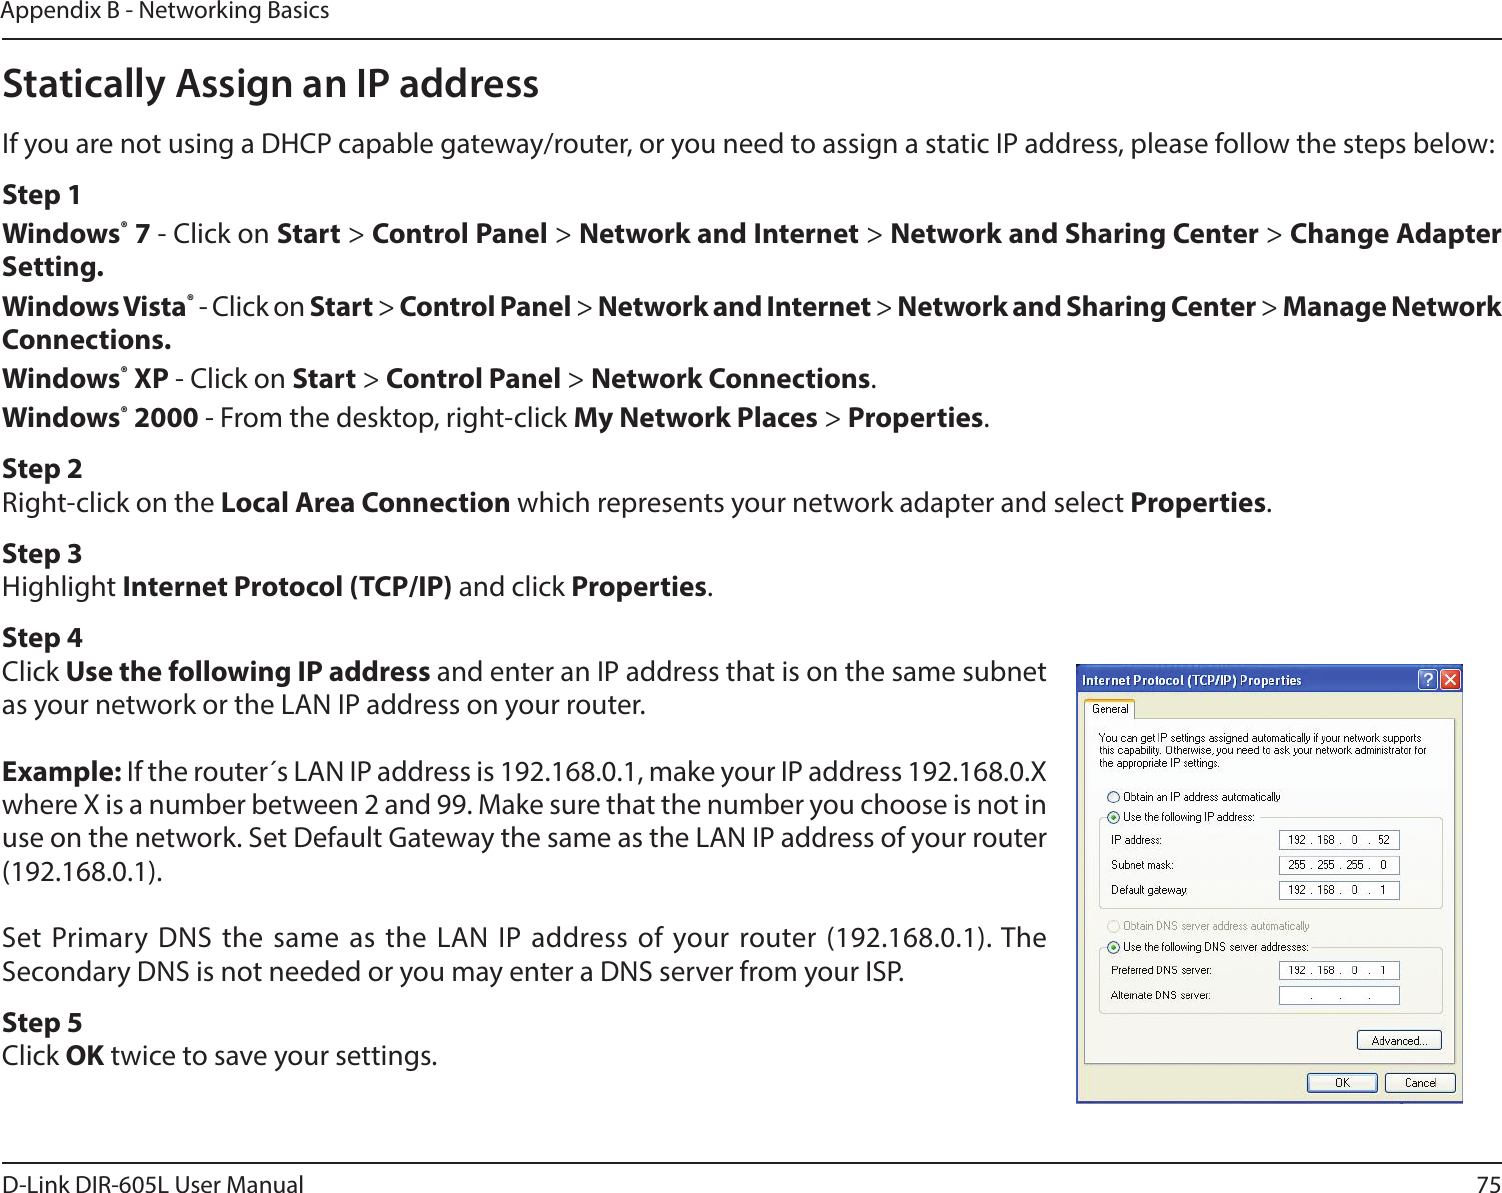 75D-Link DIR-605L User ManualAppendix B - Networking BasicsStatically Assign an IP addressIf you are not using a DHCP capable gateway/router, or you need to assign a static IP address, please follow the steps below:Step 1Windows® 7 - Click on Start &gt; Control Panel &gt; Network and Internet &gt; Network and Sharing Center &gt; Change Adapter Setting. Windows Vista® - Click on Start &gt; Control Panel &gt; Network and Internet &gt; Network and Sharing Center &gt; Manage Network Connections.Windows® XP - Click on Start &gt; Control Panel &gt; Network Connections.Windows® 2000 - From the desktop, right-click My Network Places &gt; Properties.Step 2Right-click on the Local Area Connection which represents your network adapter and select Properties.Step 3Highlight Internet Protocol (TCP/IP) and click Properties.Step 4Click Use the following IP address and enter an IP address that is on the same subnet as your network or the LAN IP address on your router.Example: If the router´s LAN IP address is 192.168.0.1, make your IP address 192.168.0.X where X is a number between 2 and 99. Make sure that the number you choose is not in use on the network. Set Default Gateway the same as the LAN IP address of your router (192.168.0.1). Set Primary DNS the same as the LAN IP address of your router (192.168.0.1). The Secondary DNS is not needed or you may enter a DNS server from your ISP.Step 5Click OK twice to save your settings.